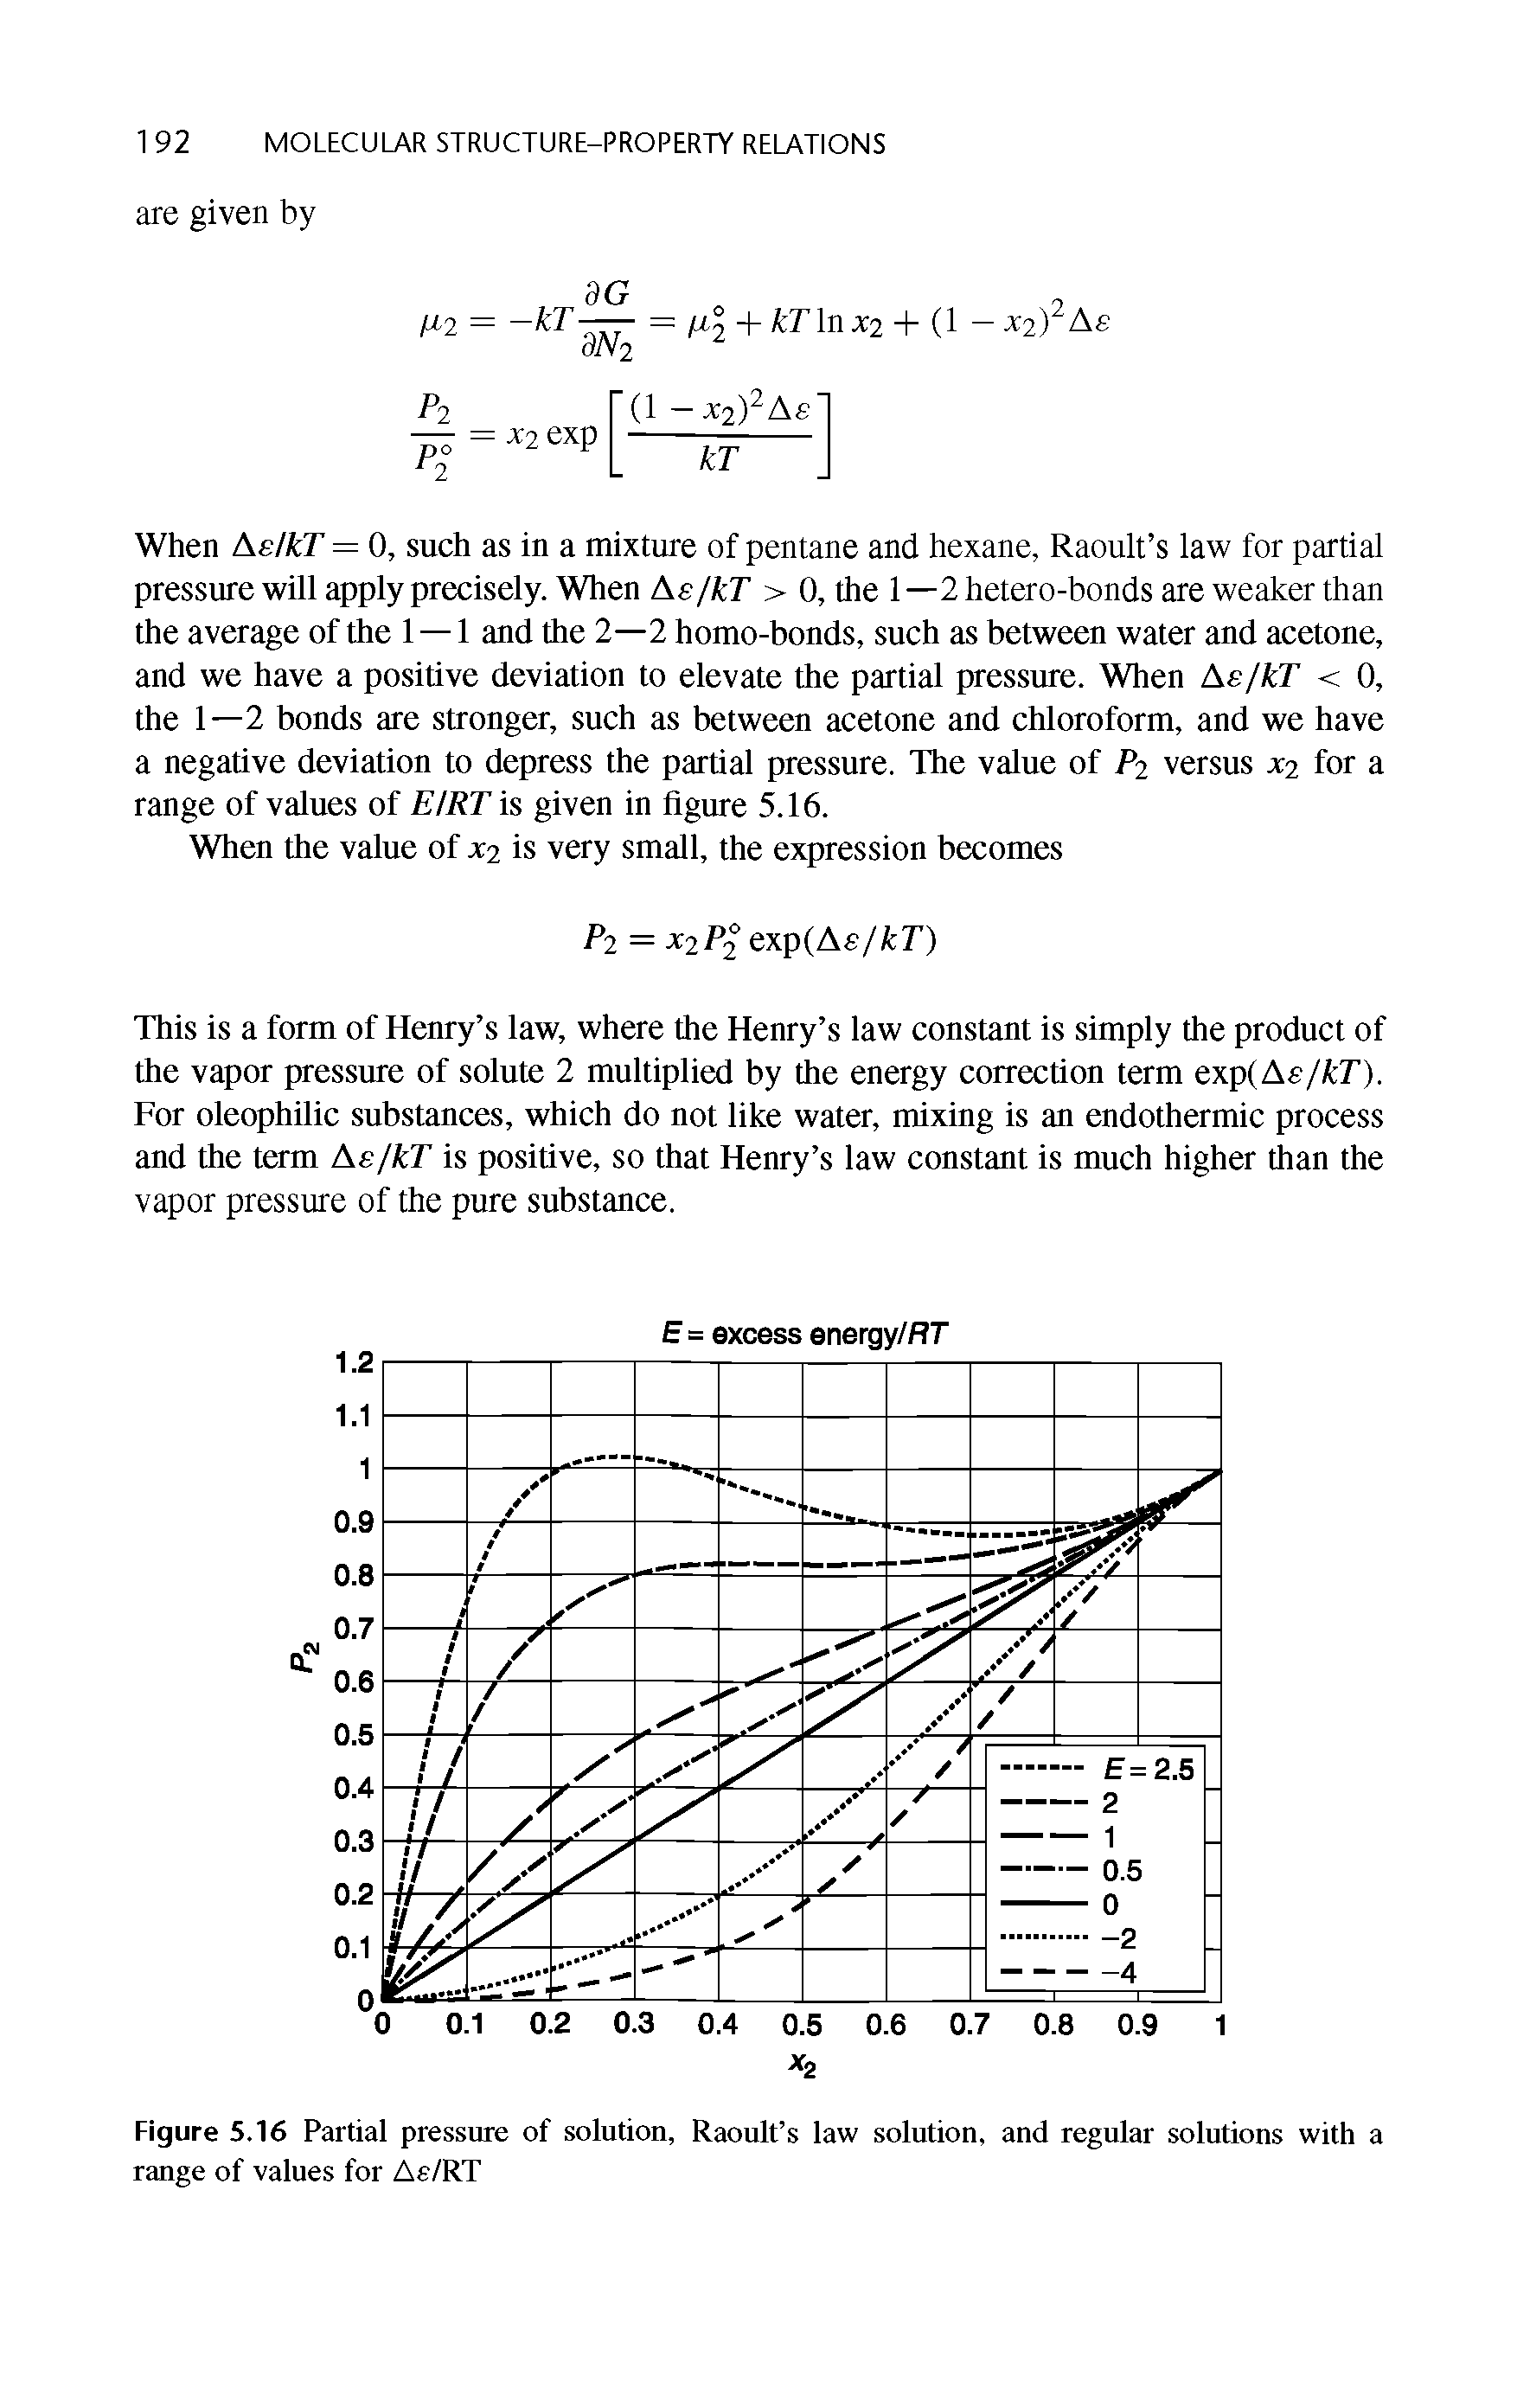 Figure 5.16 Partial pressure of solution, Raoult s law solution, and regular solutions with a range of values for A /RT...